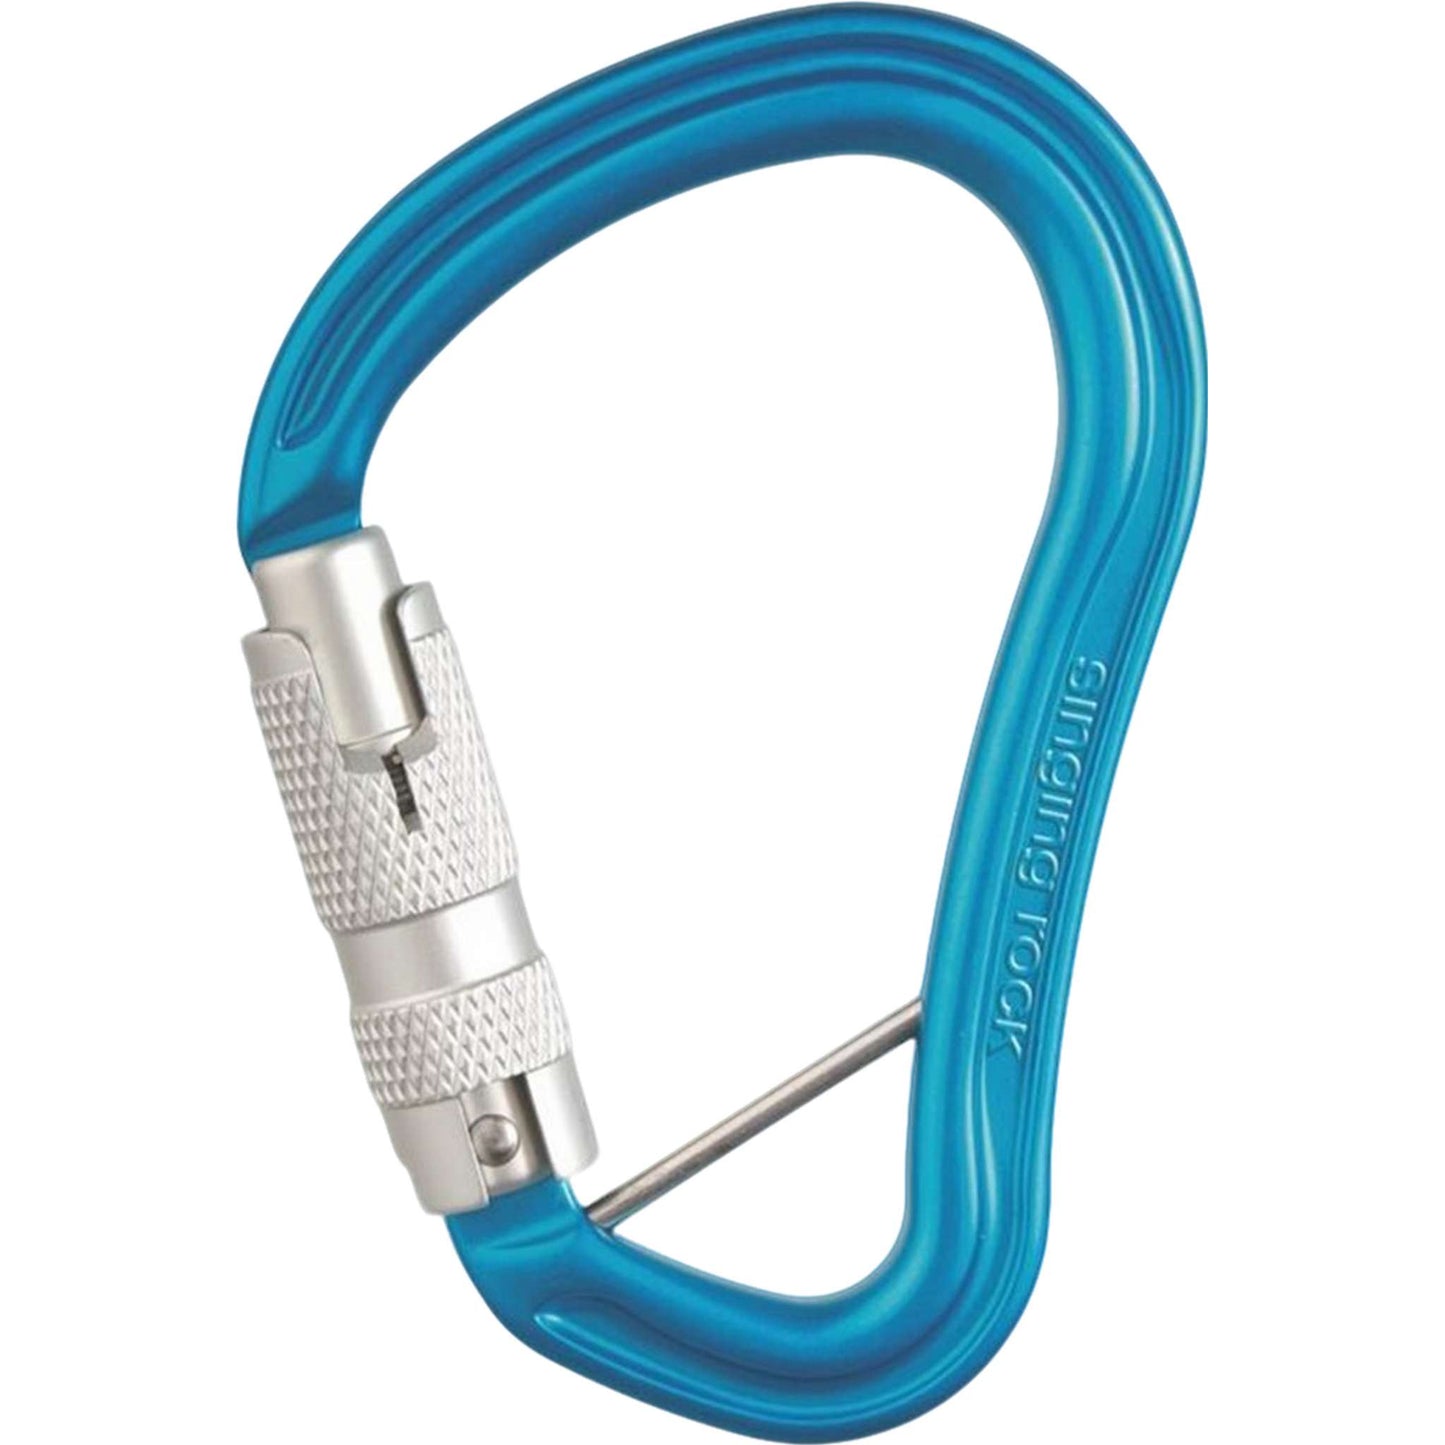 Hector BC Triple Lock HMS Carabiner - Versatile, High-Strength, Pear-Shaped for Climbing & Anchoring